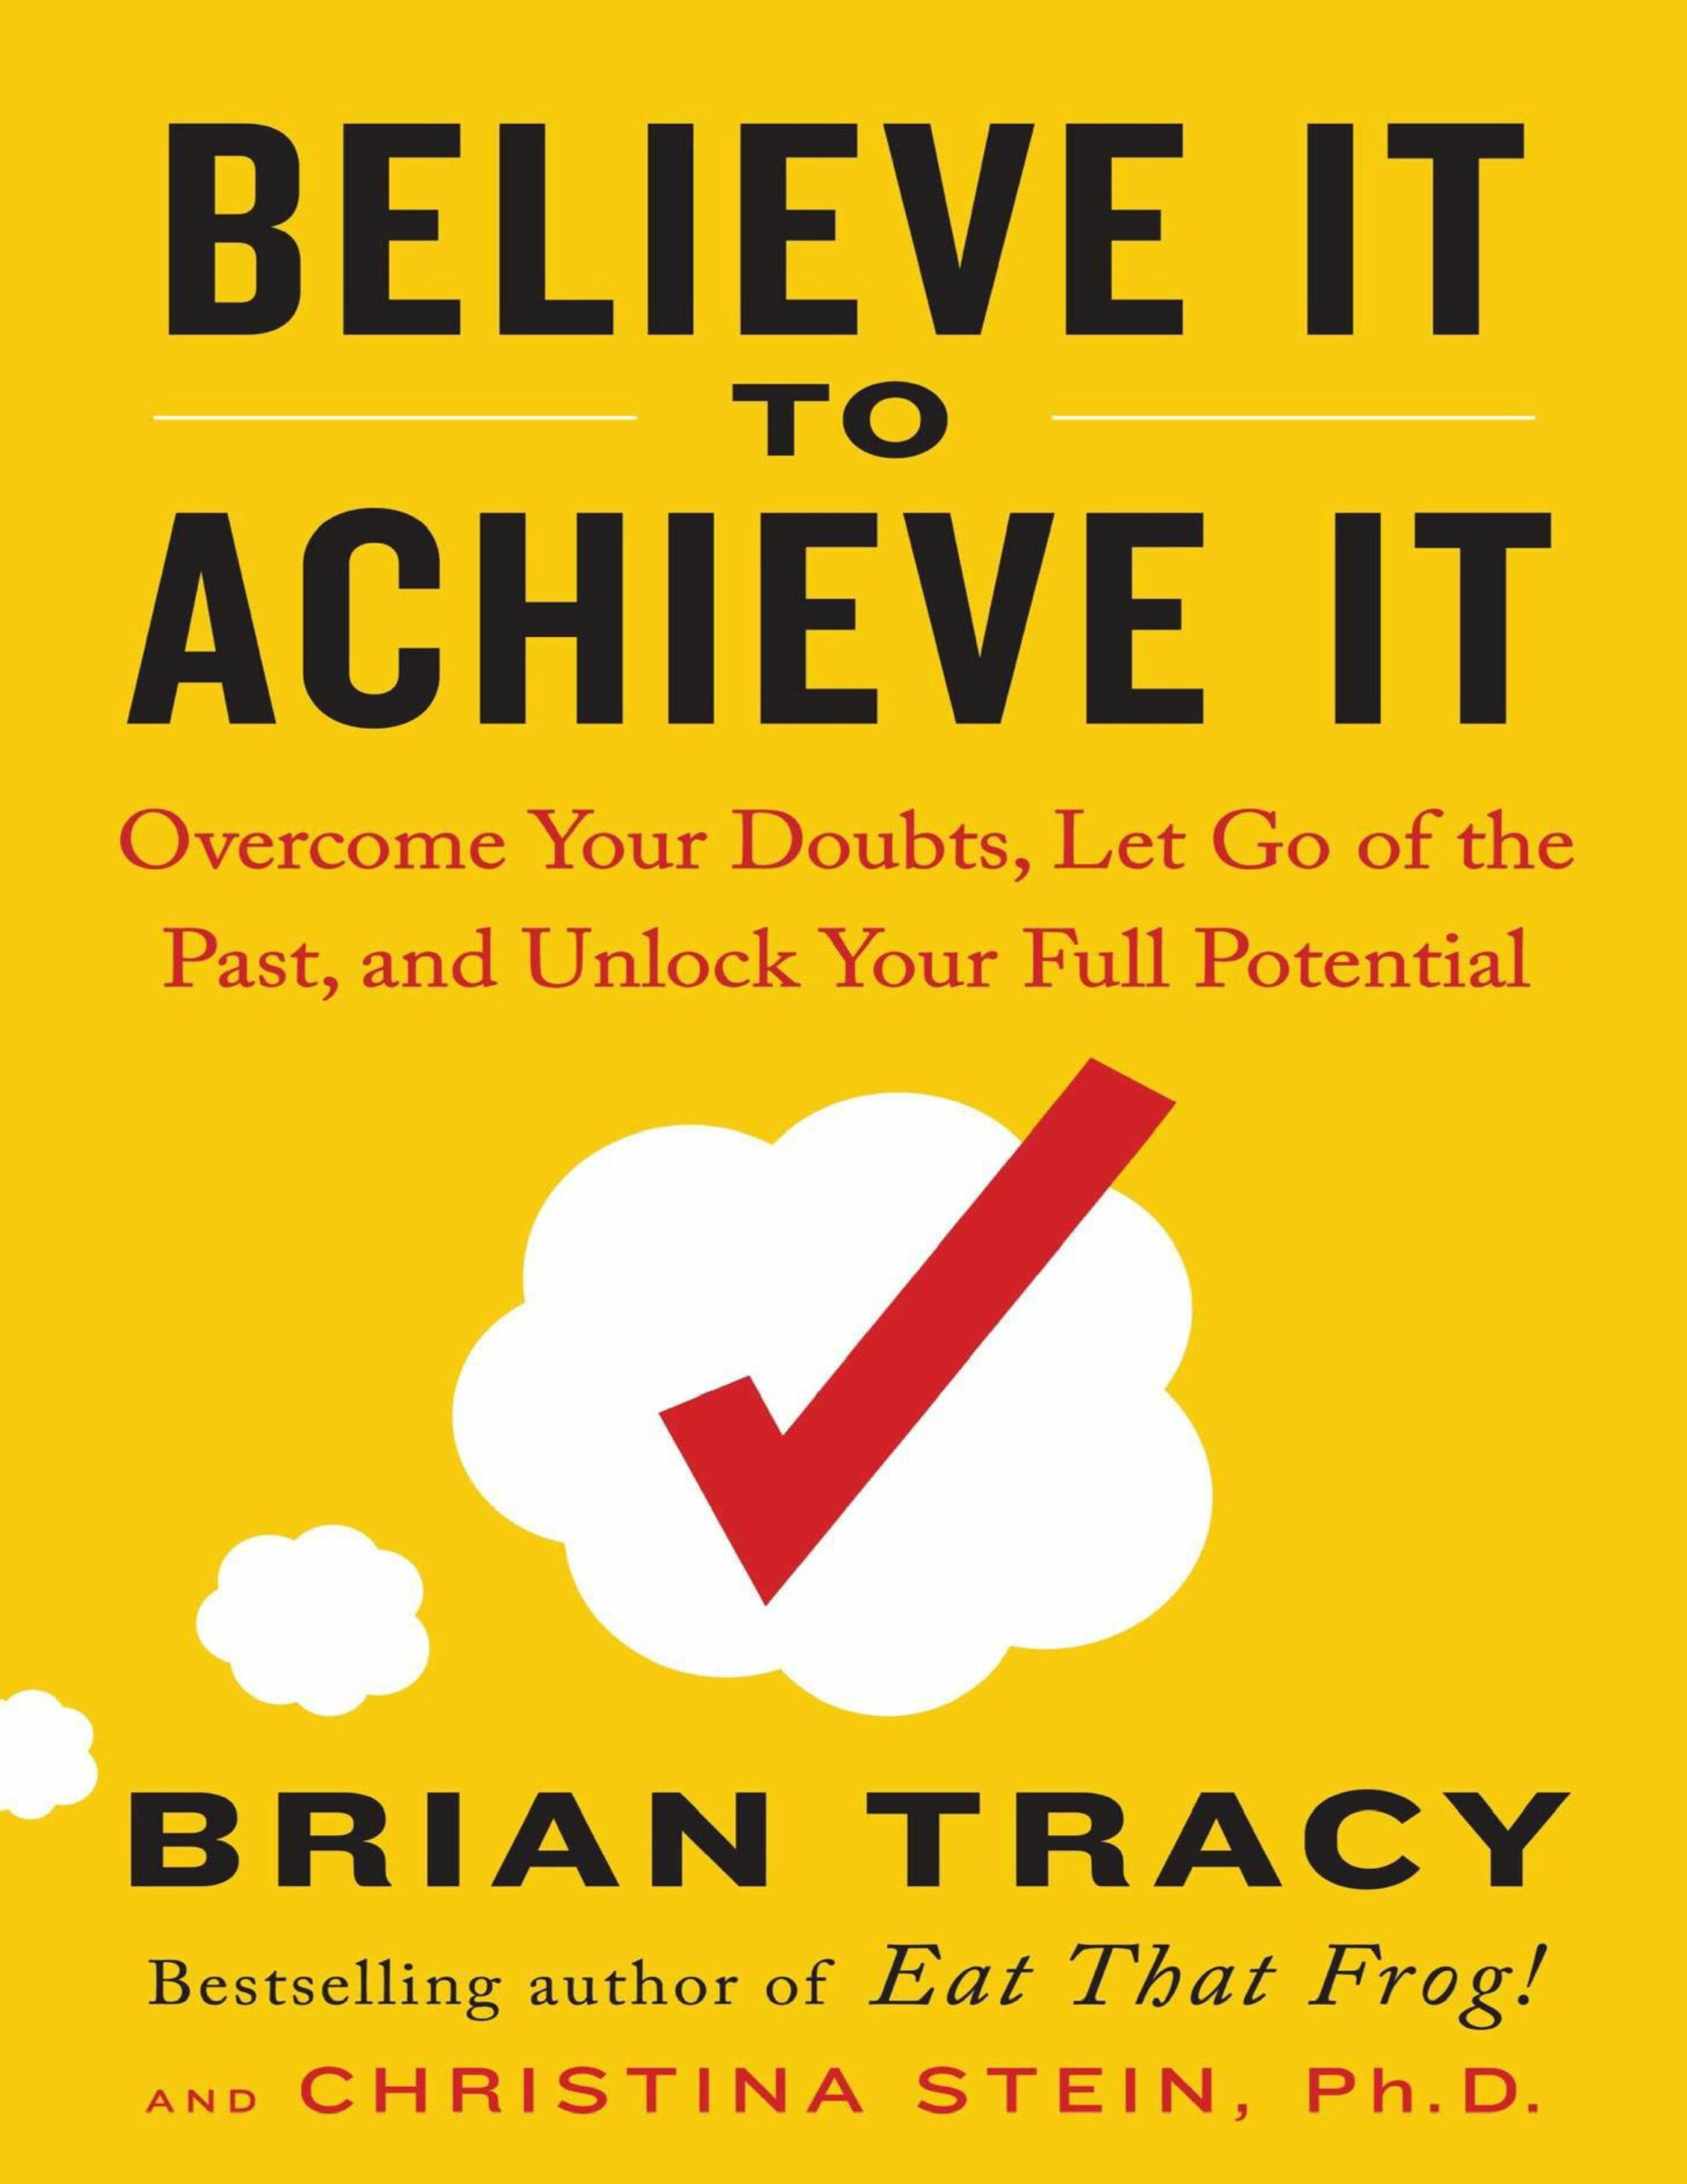 Believe it to achieve it book cover photo